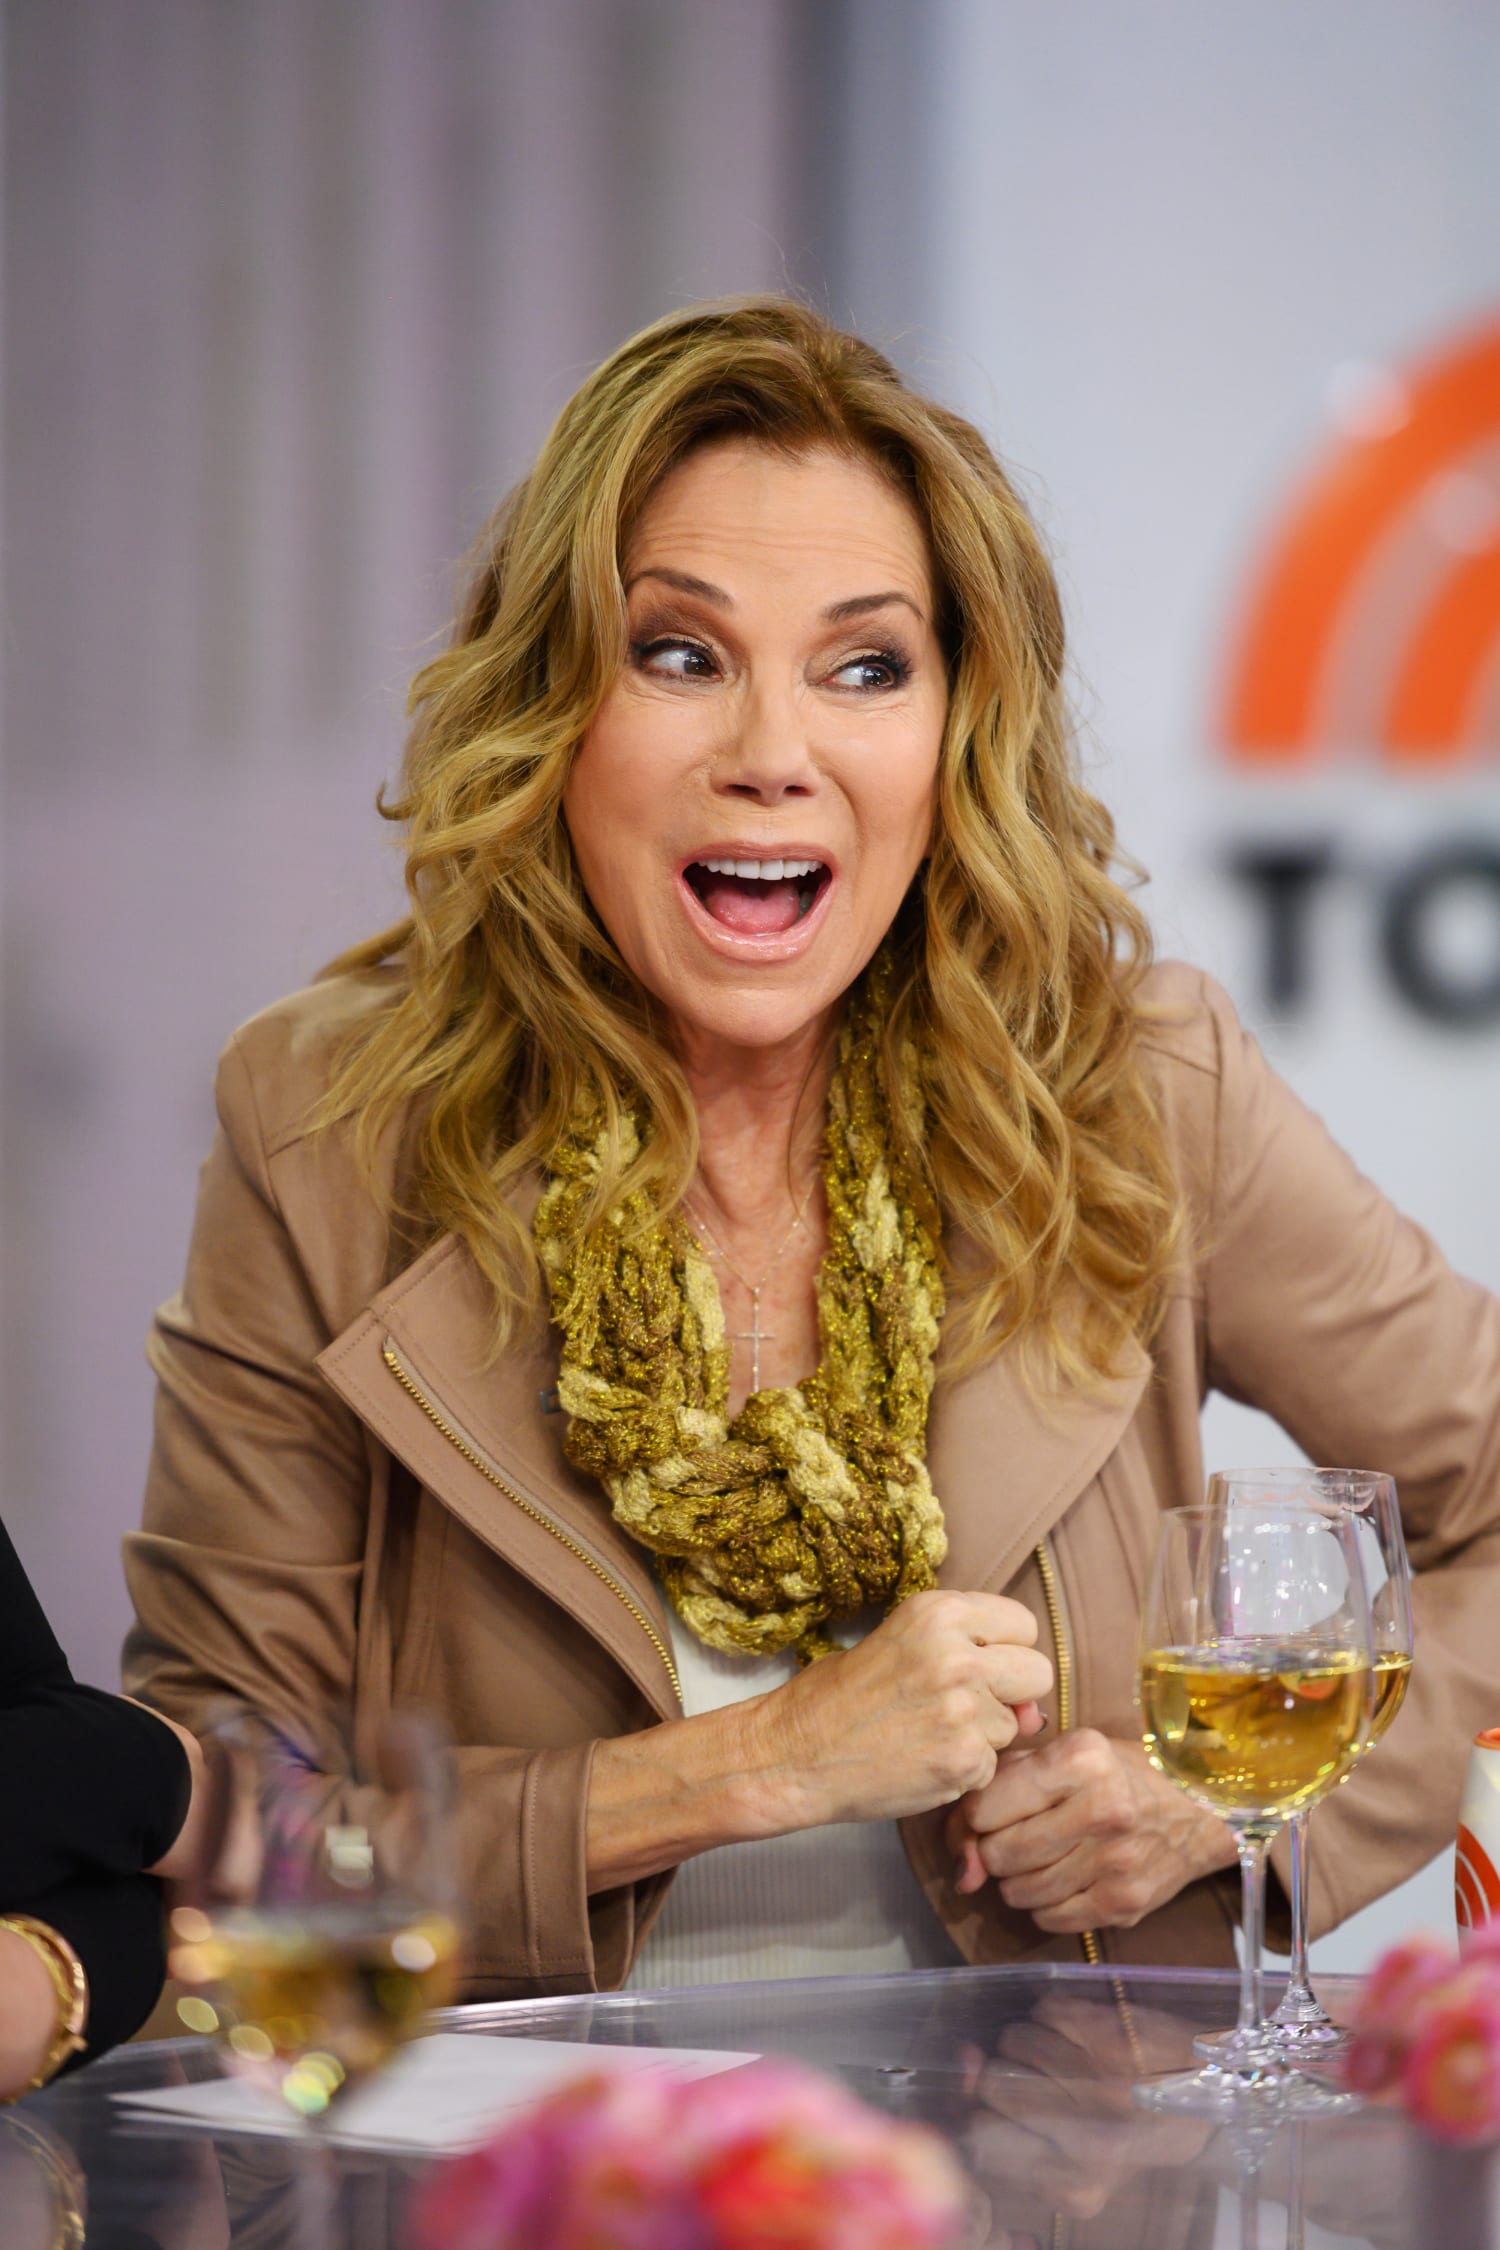 Kathie Lee Giffords New Video of Her Baby Grandson Will Make You Smile photo